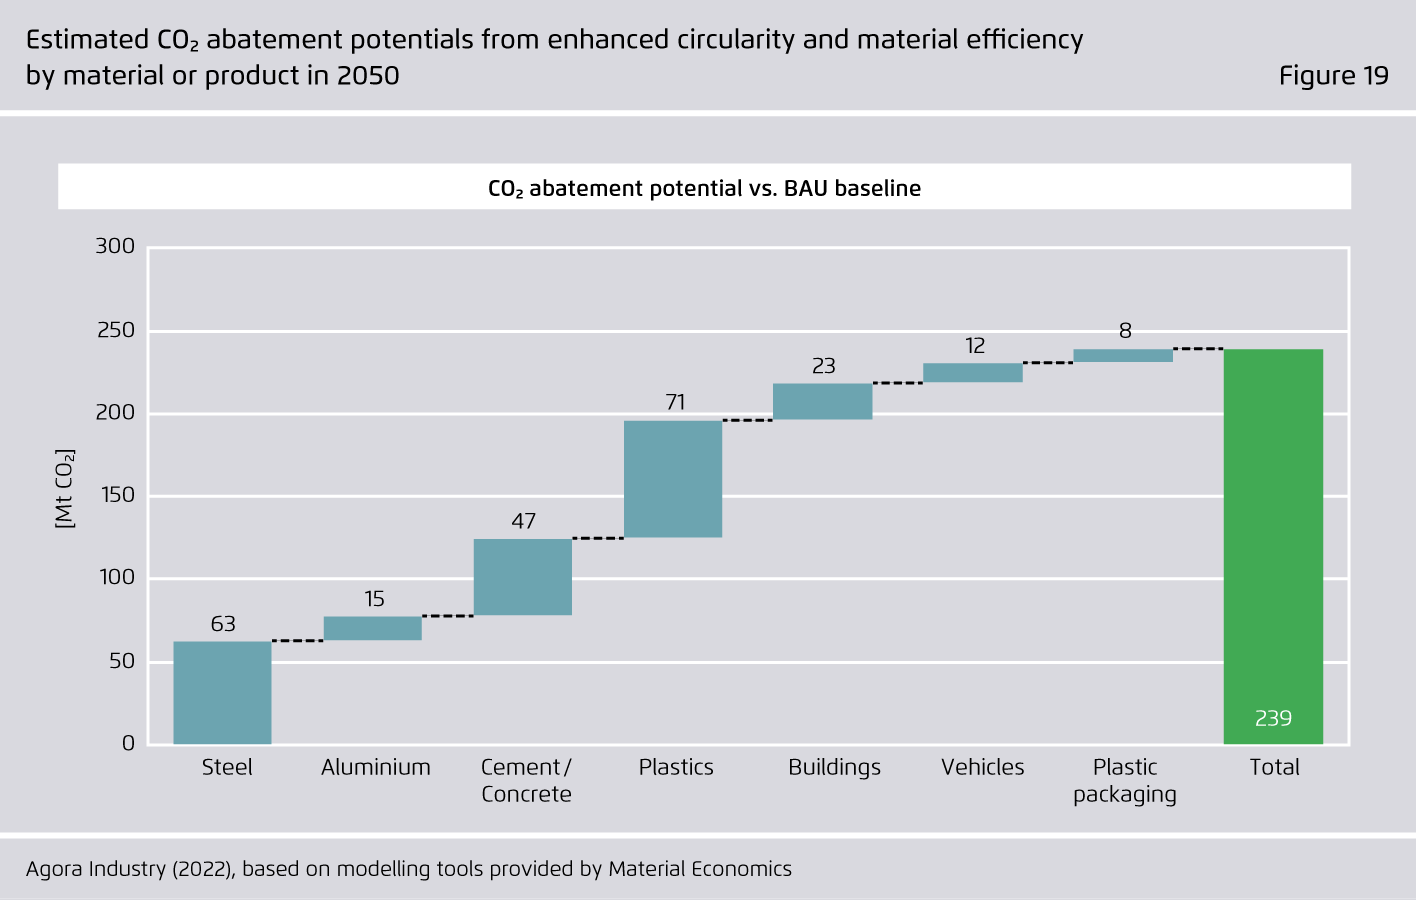 Preview for Estimated CO₂ abatement potentials from enhanced circularity and material effciency by material or product in 2050